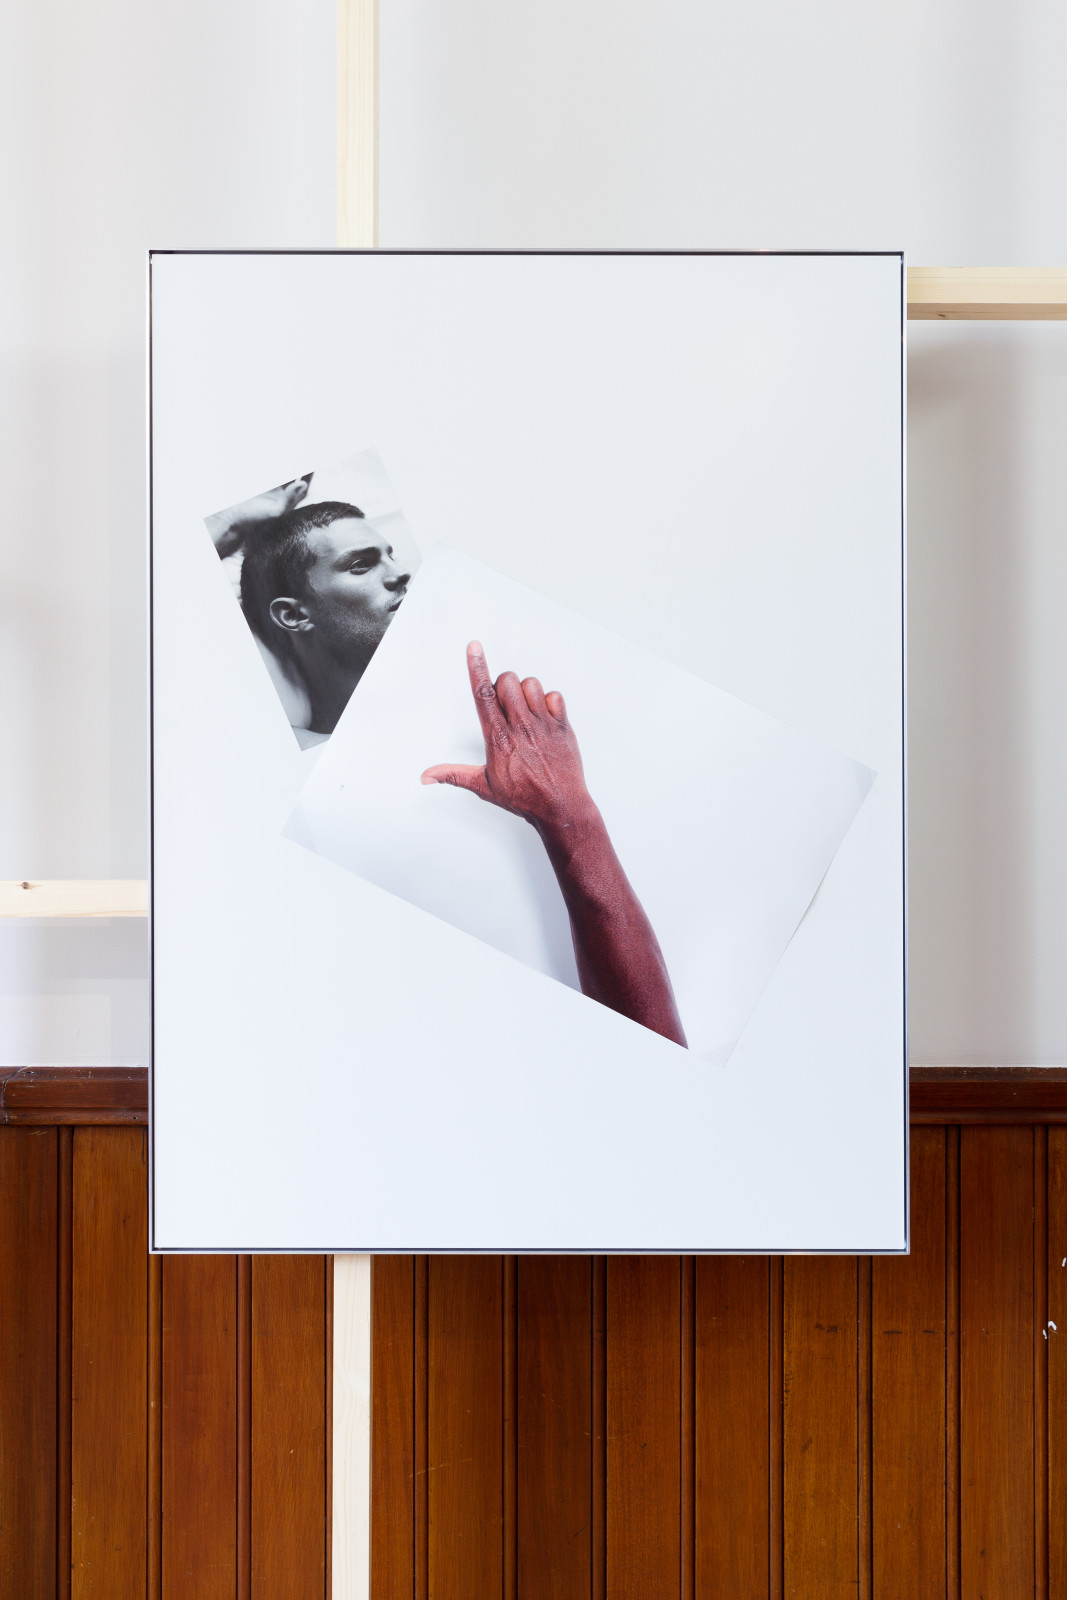 Simeon Barclay An Arrangement on white in perspective (cock on mate), 2015 Clear acrylic, Diabond, inkjet print, tape 119 x 90 x 2.5 cm